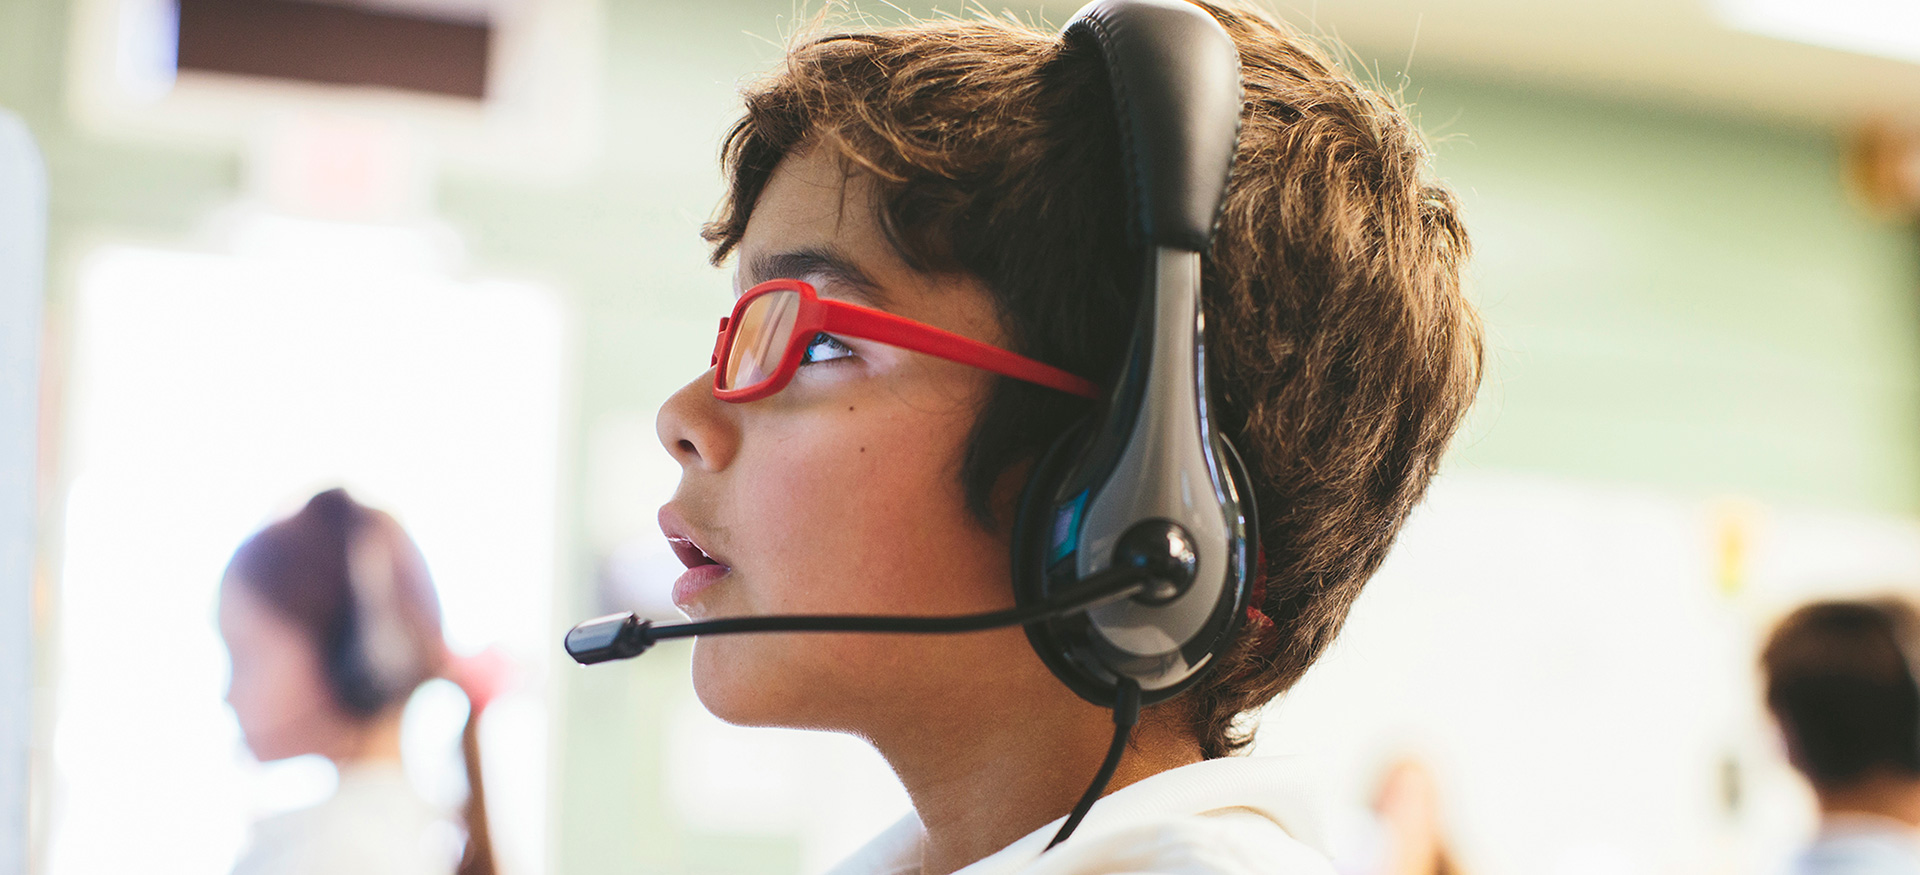 Young student wearing headphones and glasses looking up at a computer.